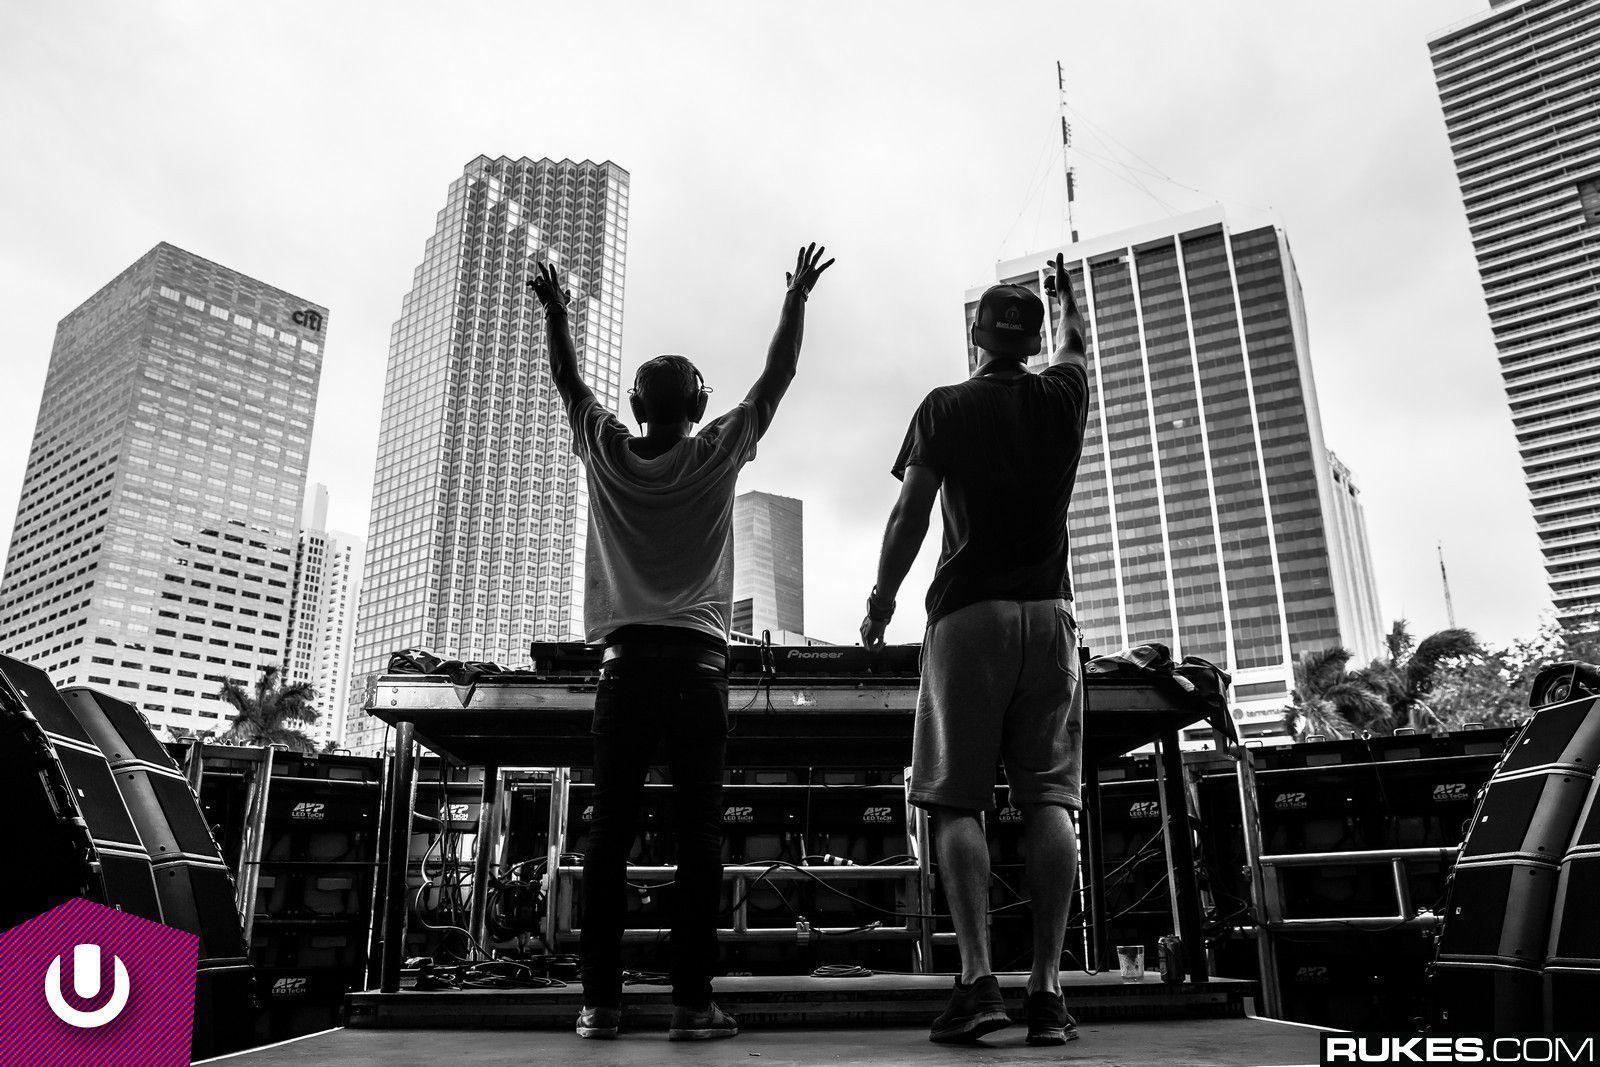 The Chainsmokers Artist Spotlight: Don't Get Too Caught Up In